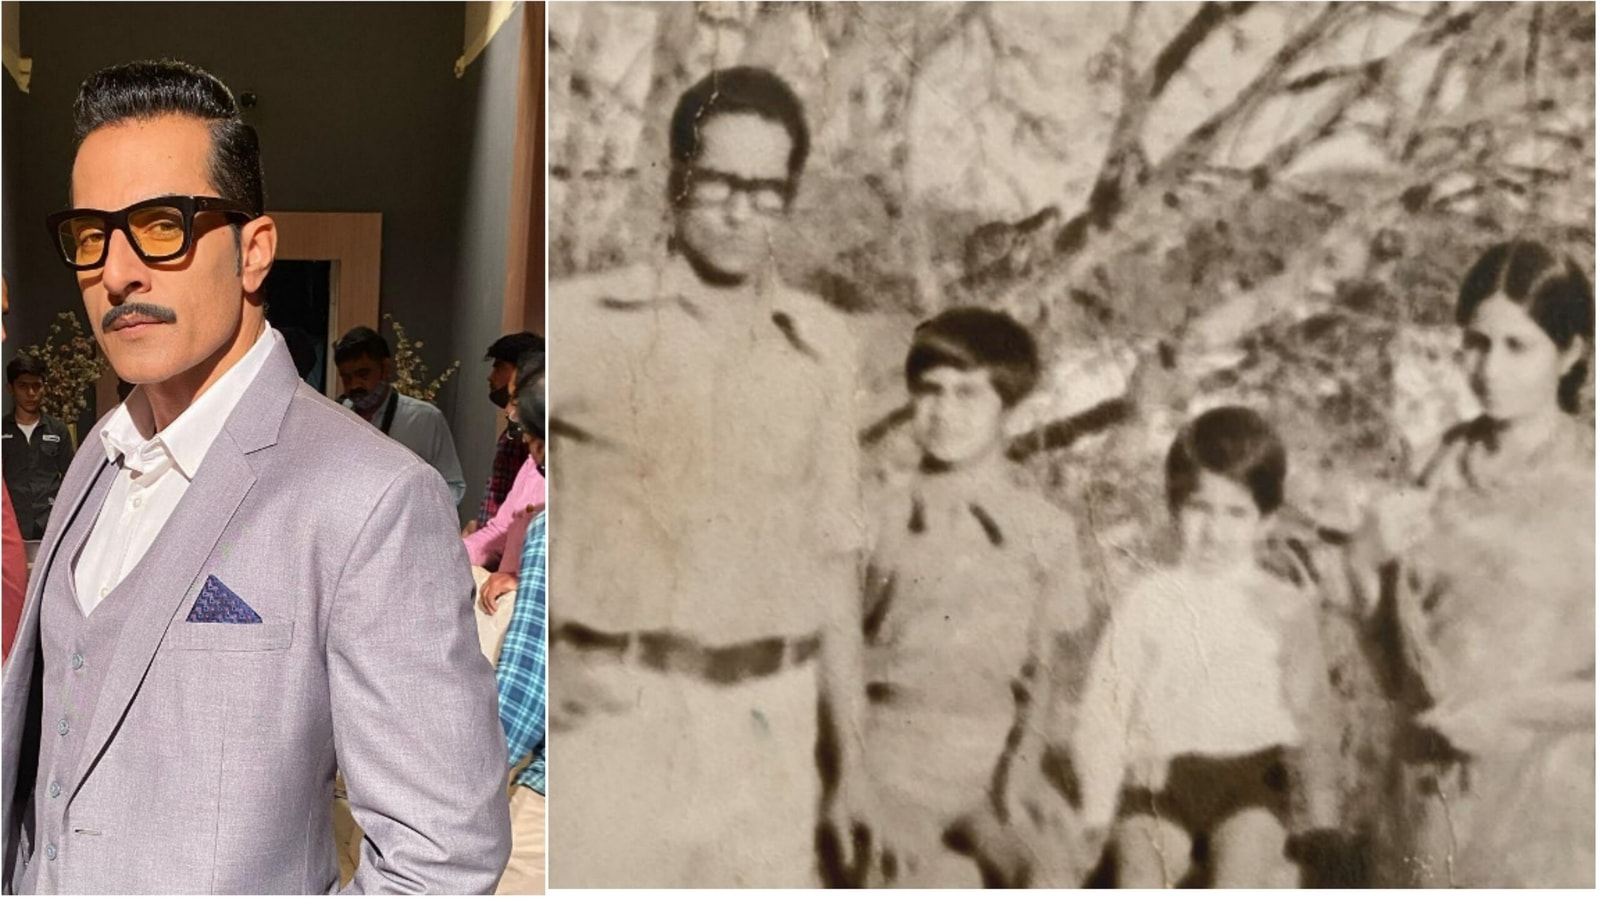 Anupamaa’s Sudhanshu Pandey shares throwback family pic; fans mistake his father for him, call them ‘carbon copies’